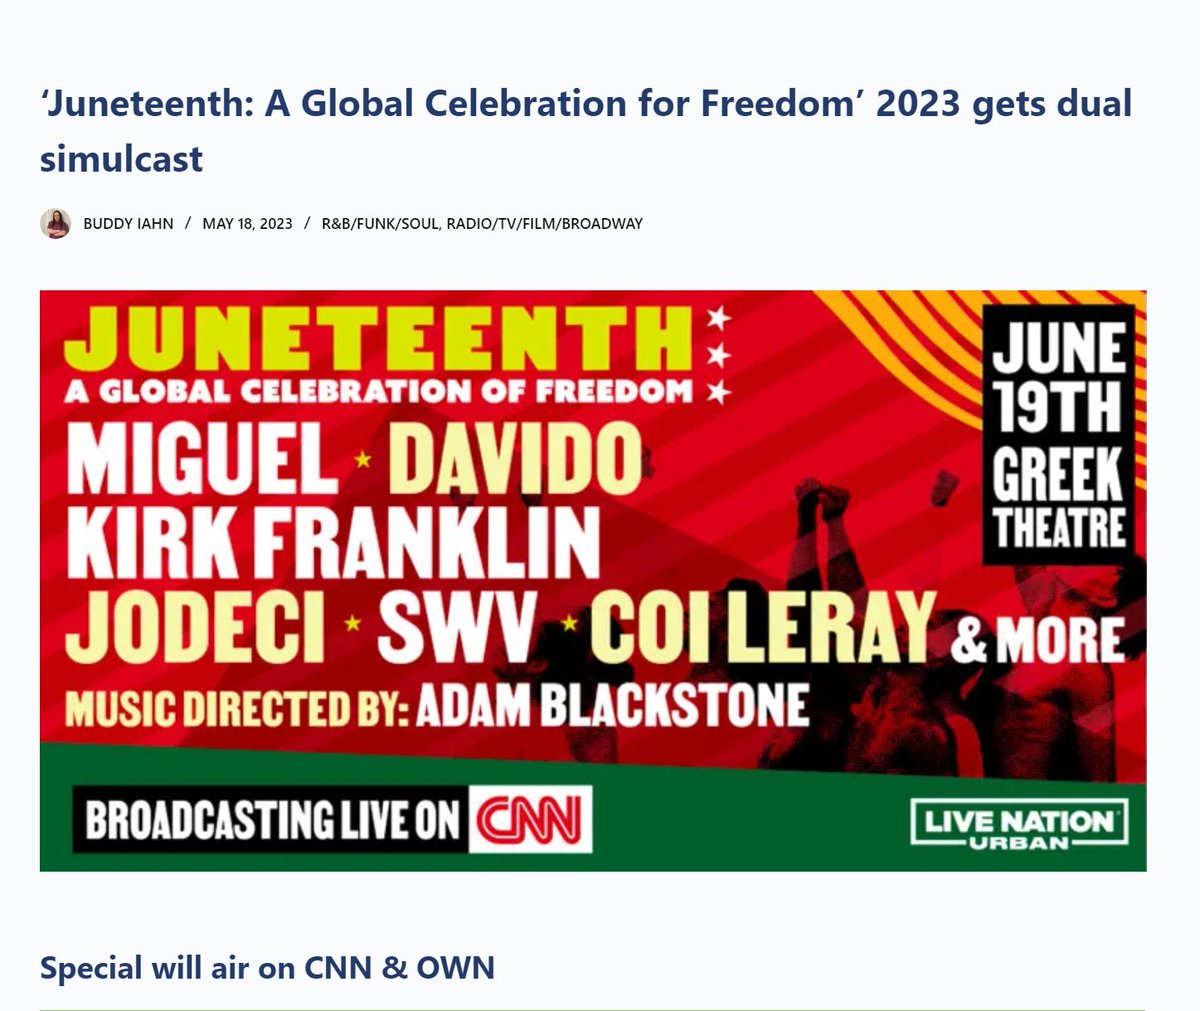 Ya'll not done with Racial Thinking and that 'Diaspora' bull $hit, yet?🫤 

'Juneteenth: A Global Celebration for Freedom, with a diverse lineup featuring essential artists and sounds from the African diaspora.'